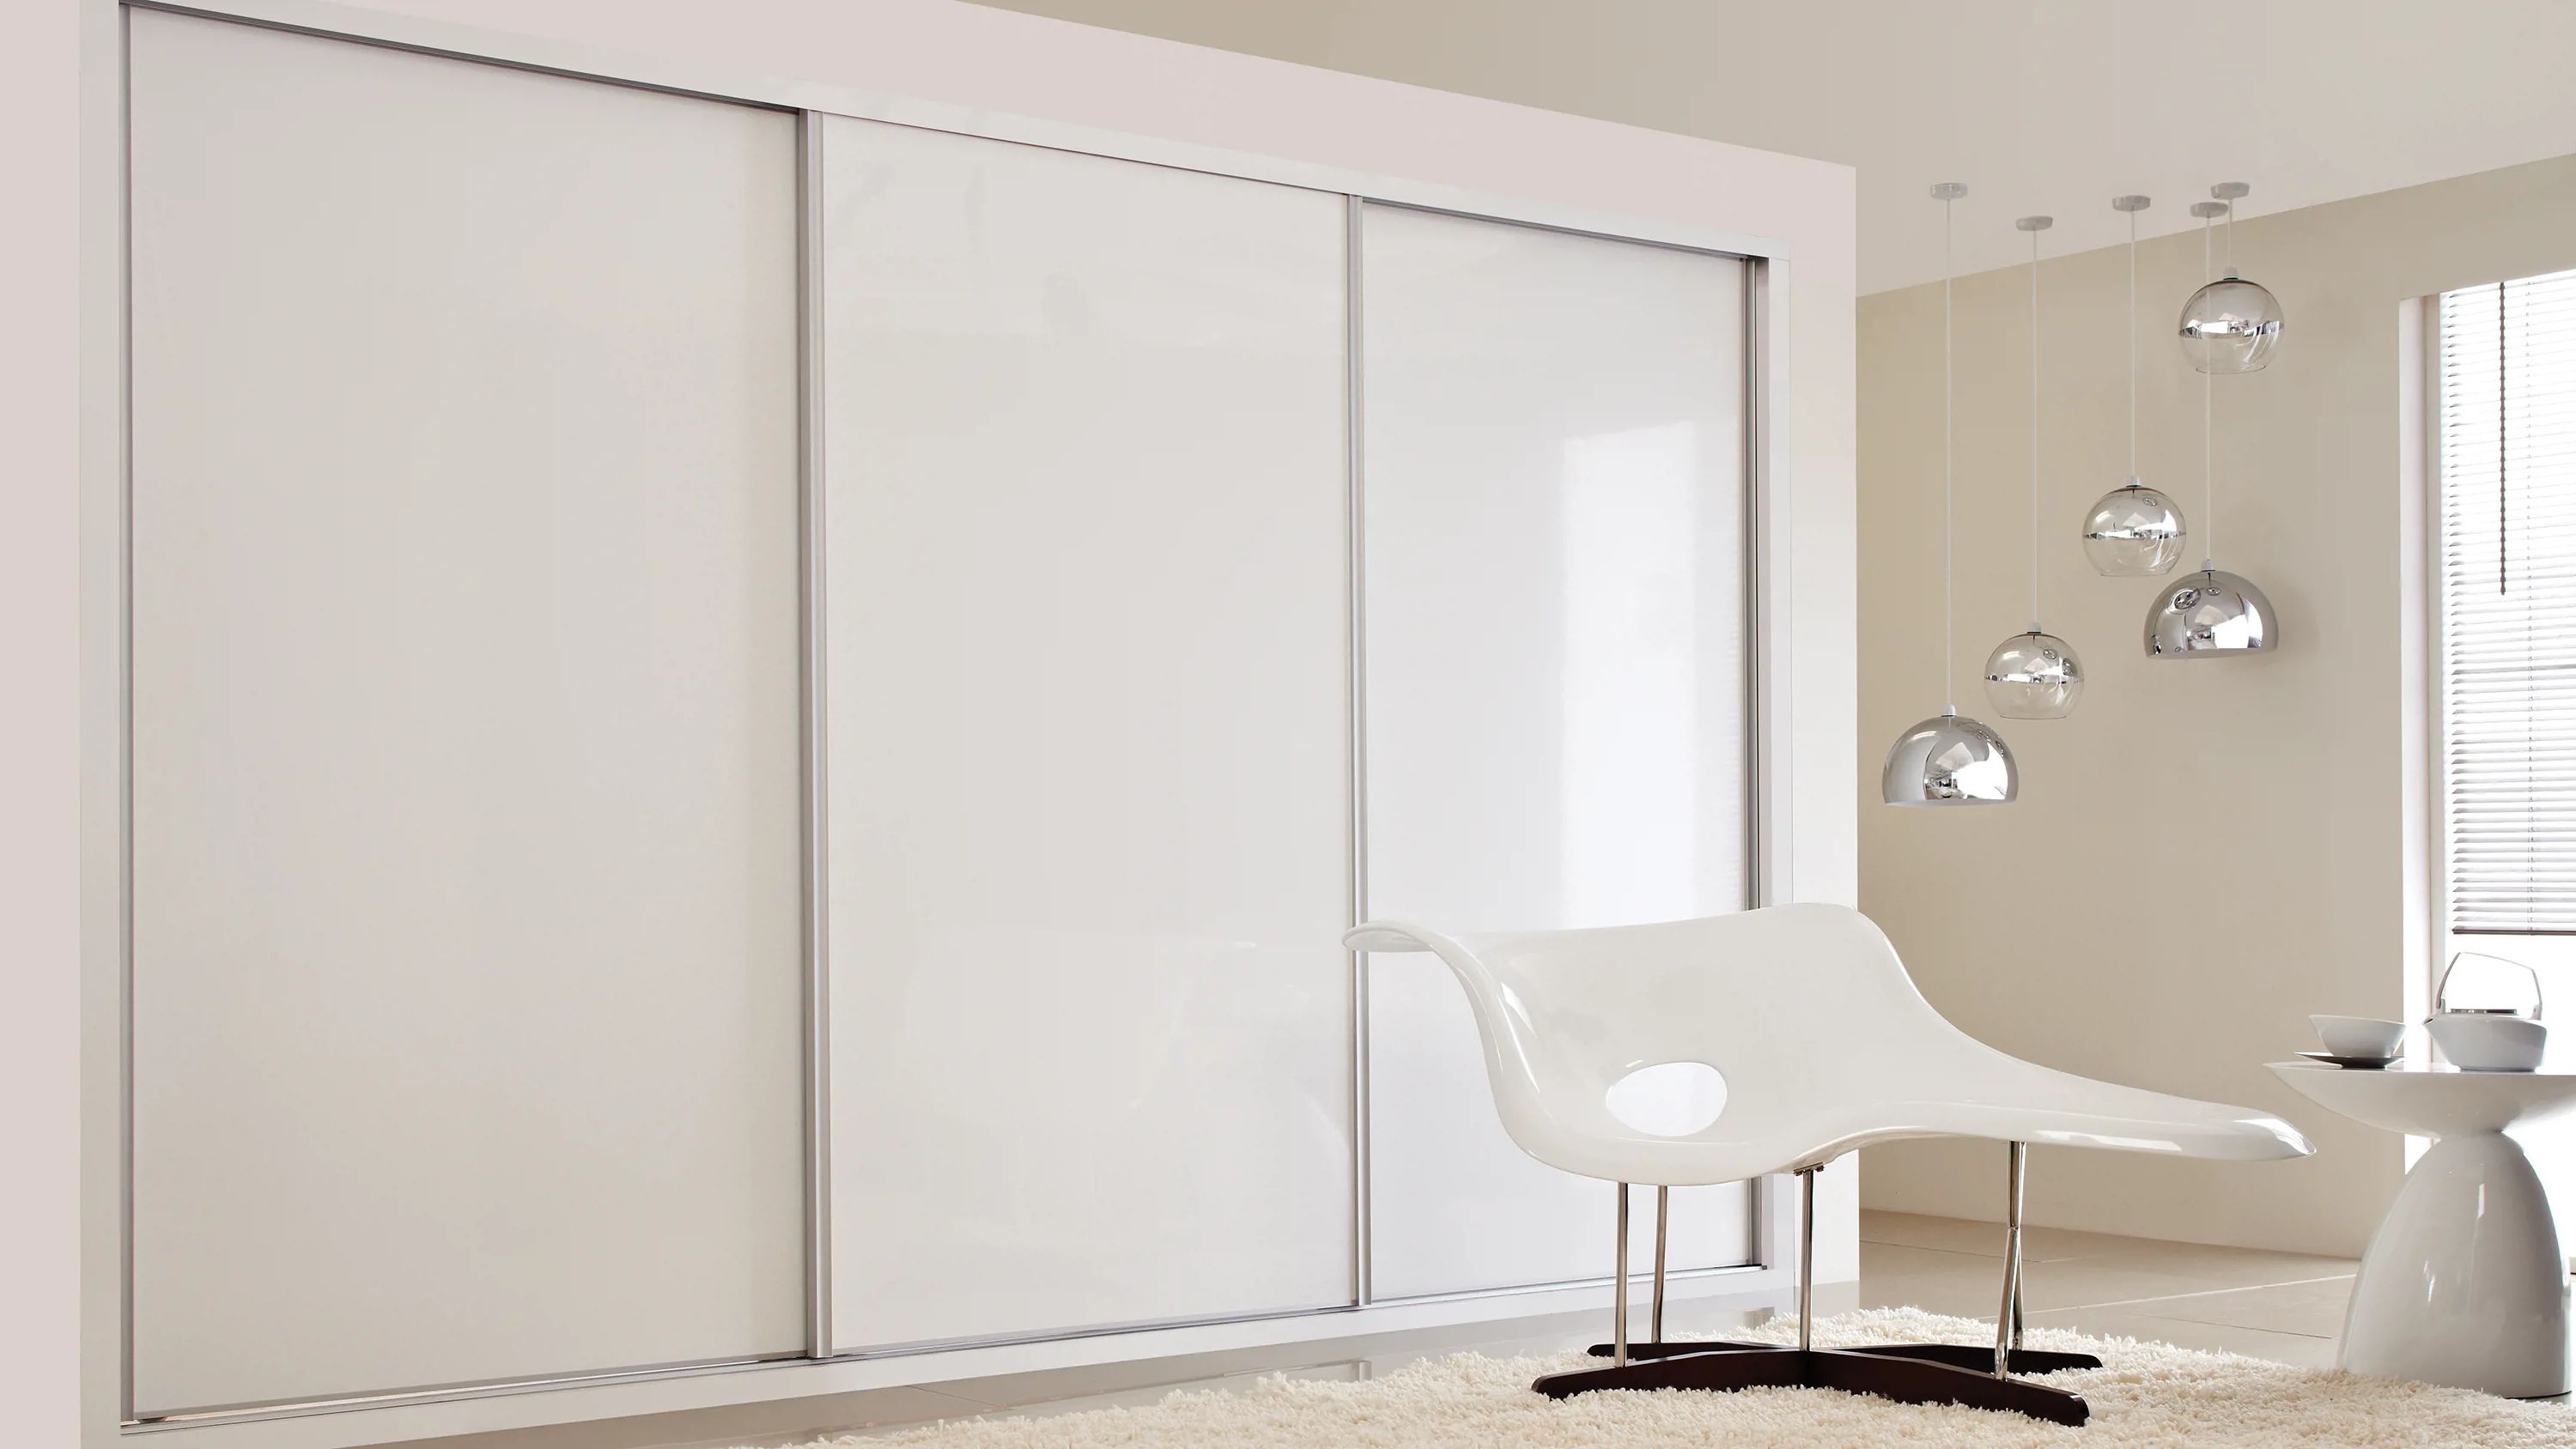 Unearth The High Gloss Fitted Sliding Wardrobes Range For Your Bedroom |  Hammonds Throughout White Gloss Sliding Wardrobes (View 4 of 15)